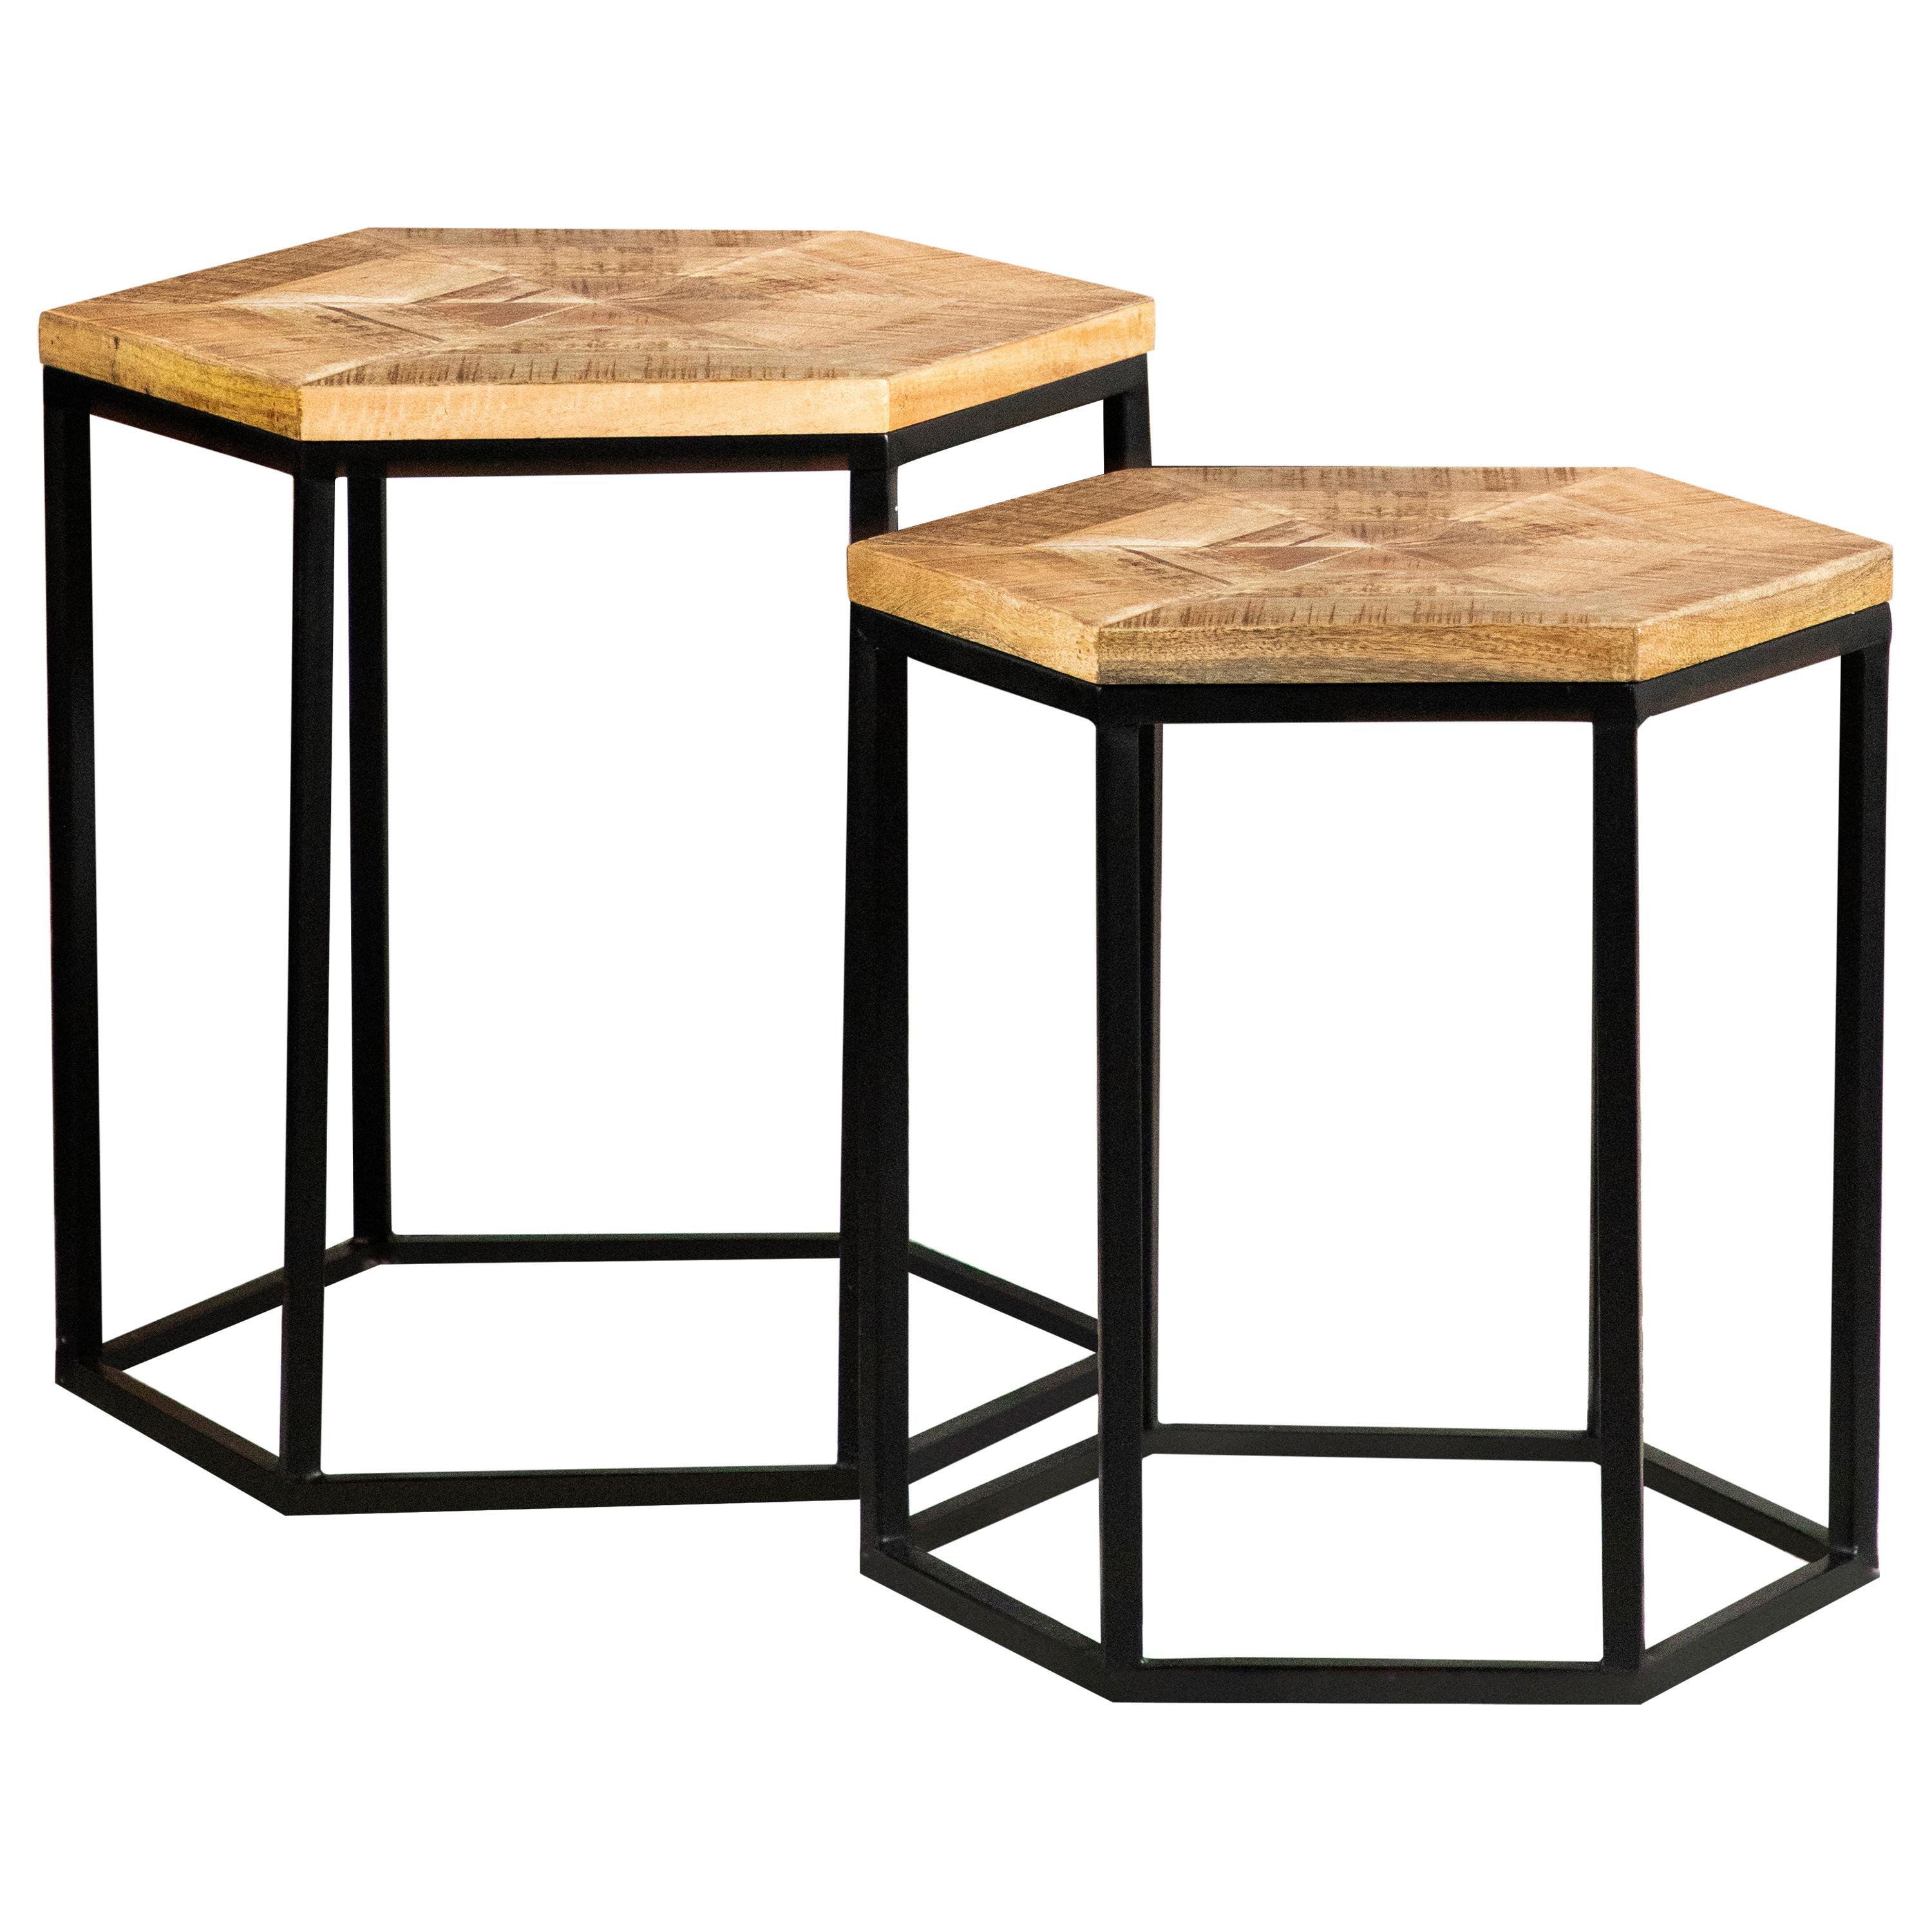 Modern Nesting Tables Set 935844 935844 in Natural 